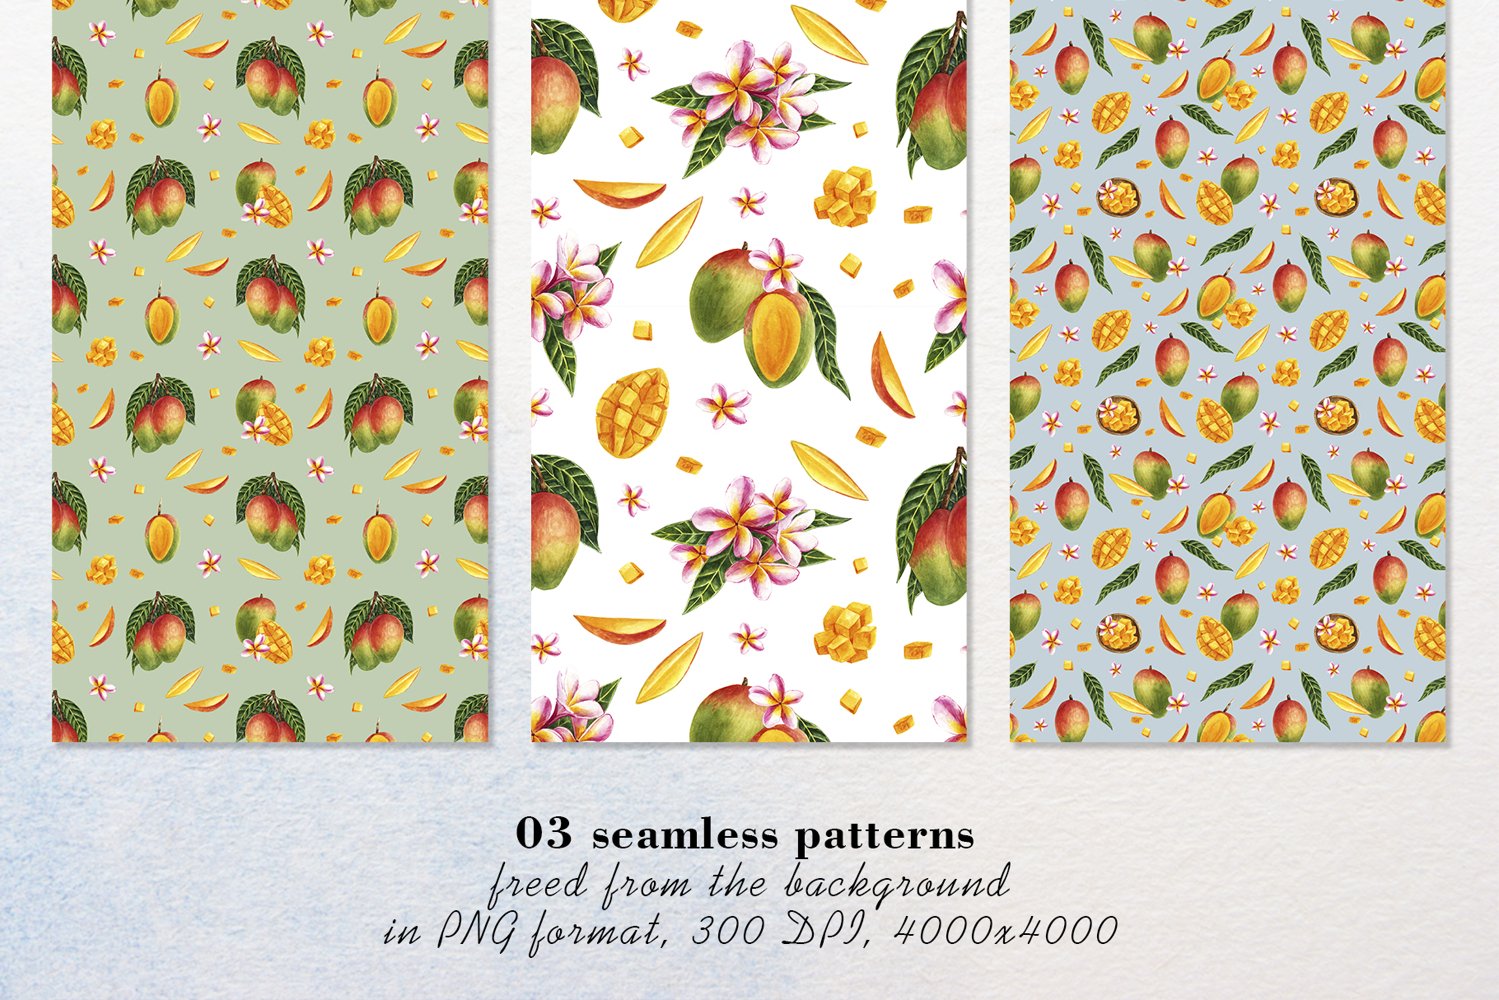 The set consists of individual elements isolated from the background and seamless patterns.